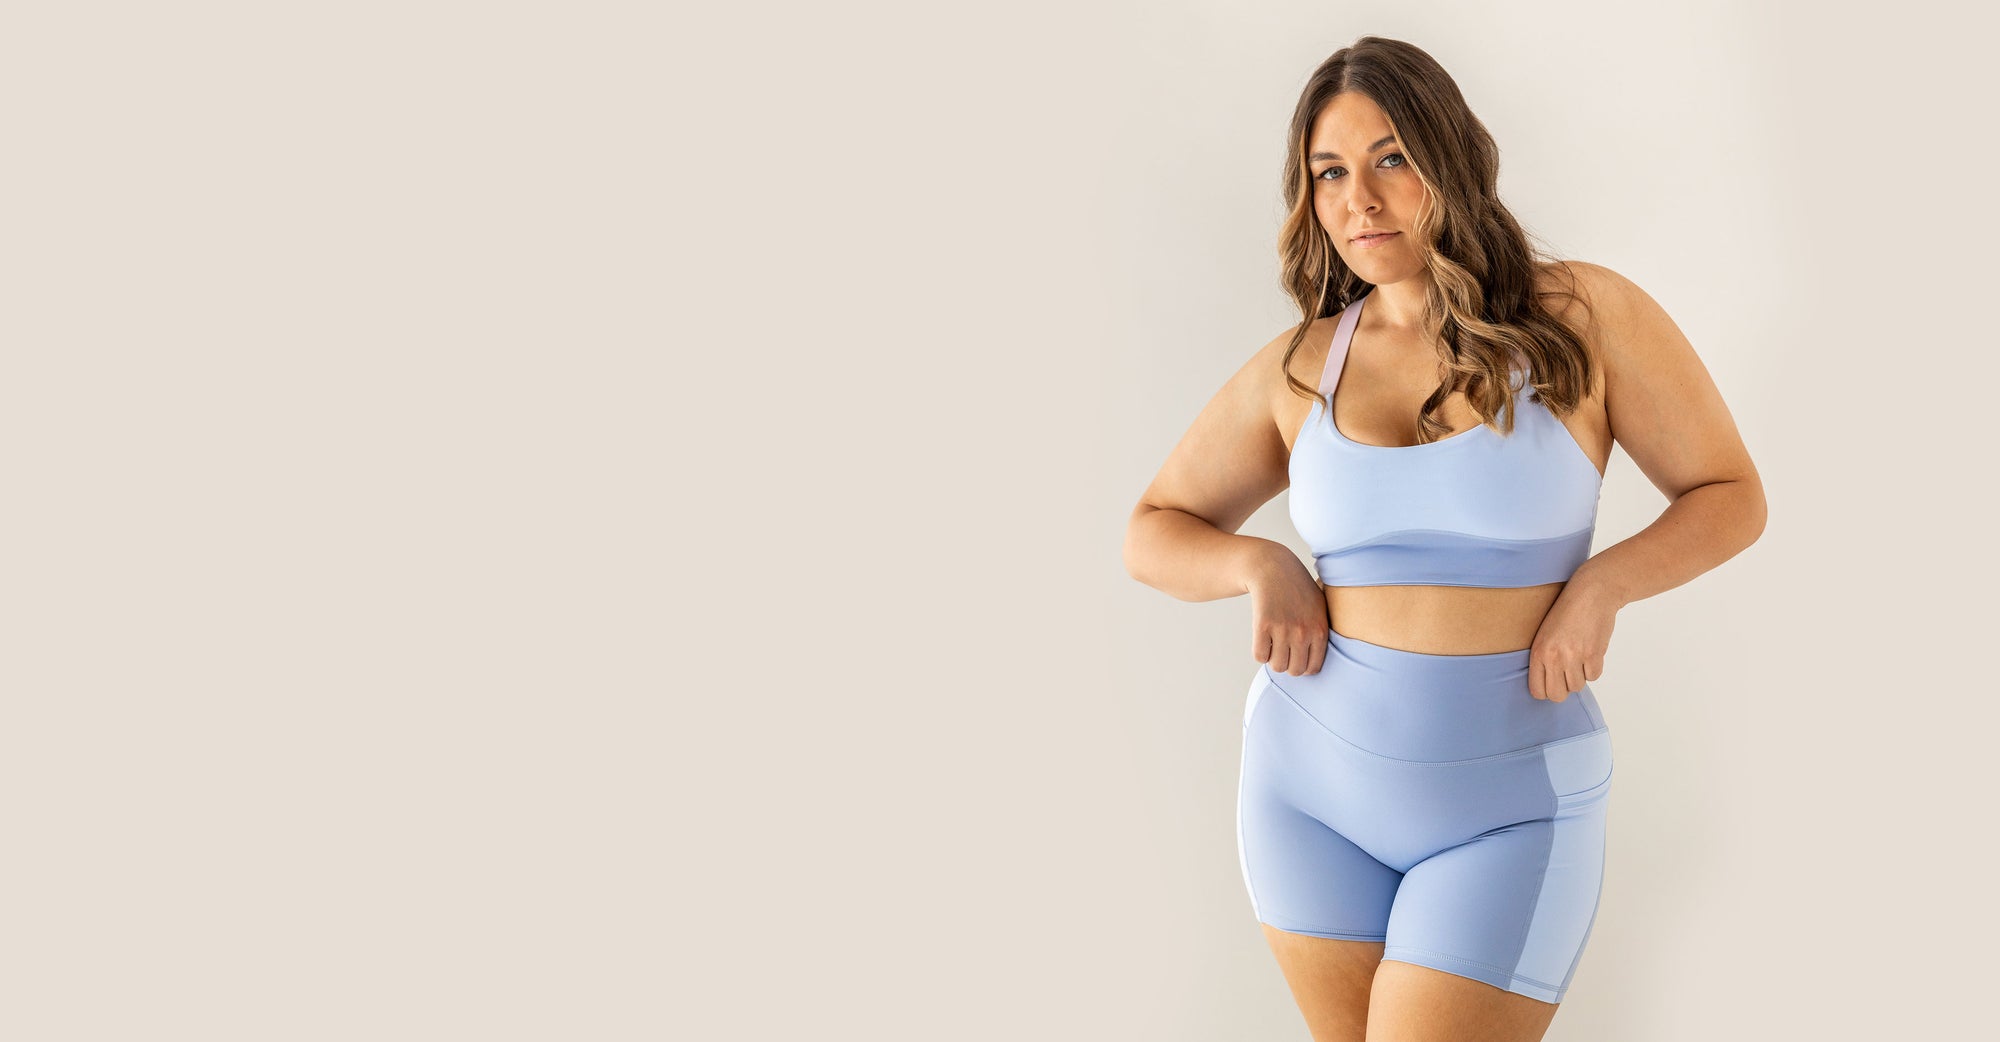 A curvy Earthletica Model wearing the Cascade Crop & Crystal Clear Pocket Set. She is looking directly at the camera, standing with her legs slightly crossed and her hands on the waistband of the shorts.